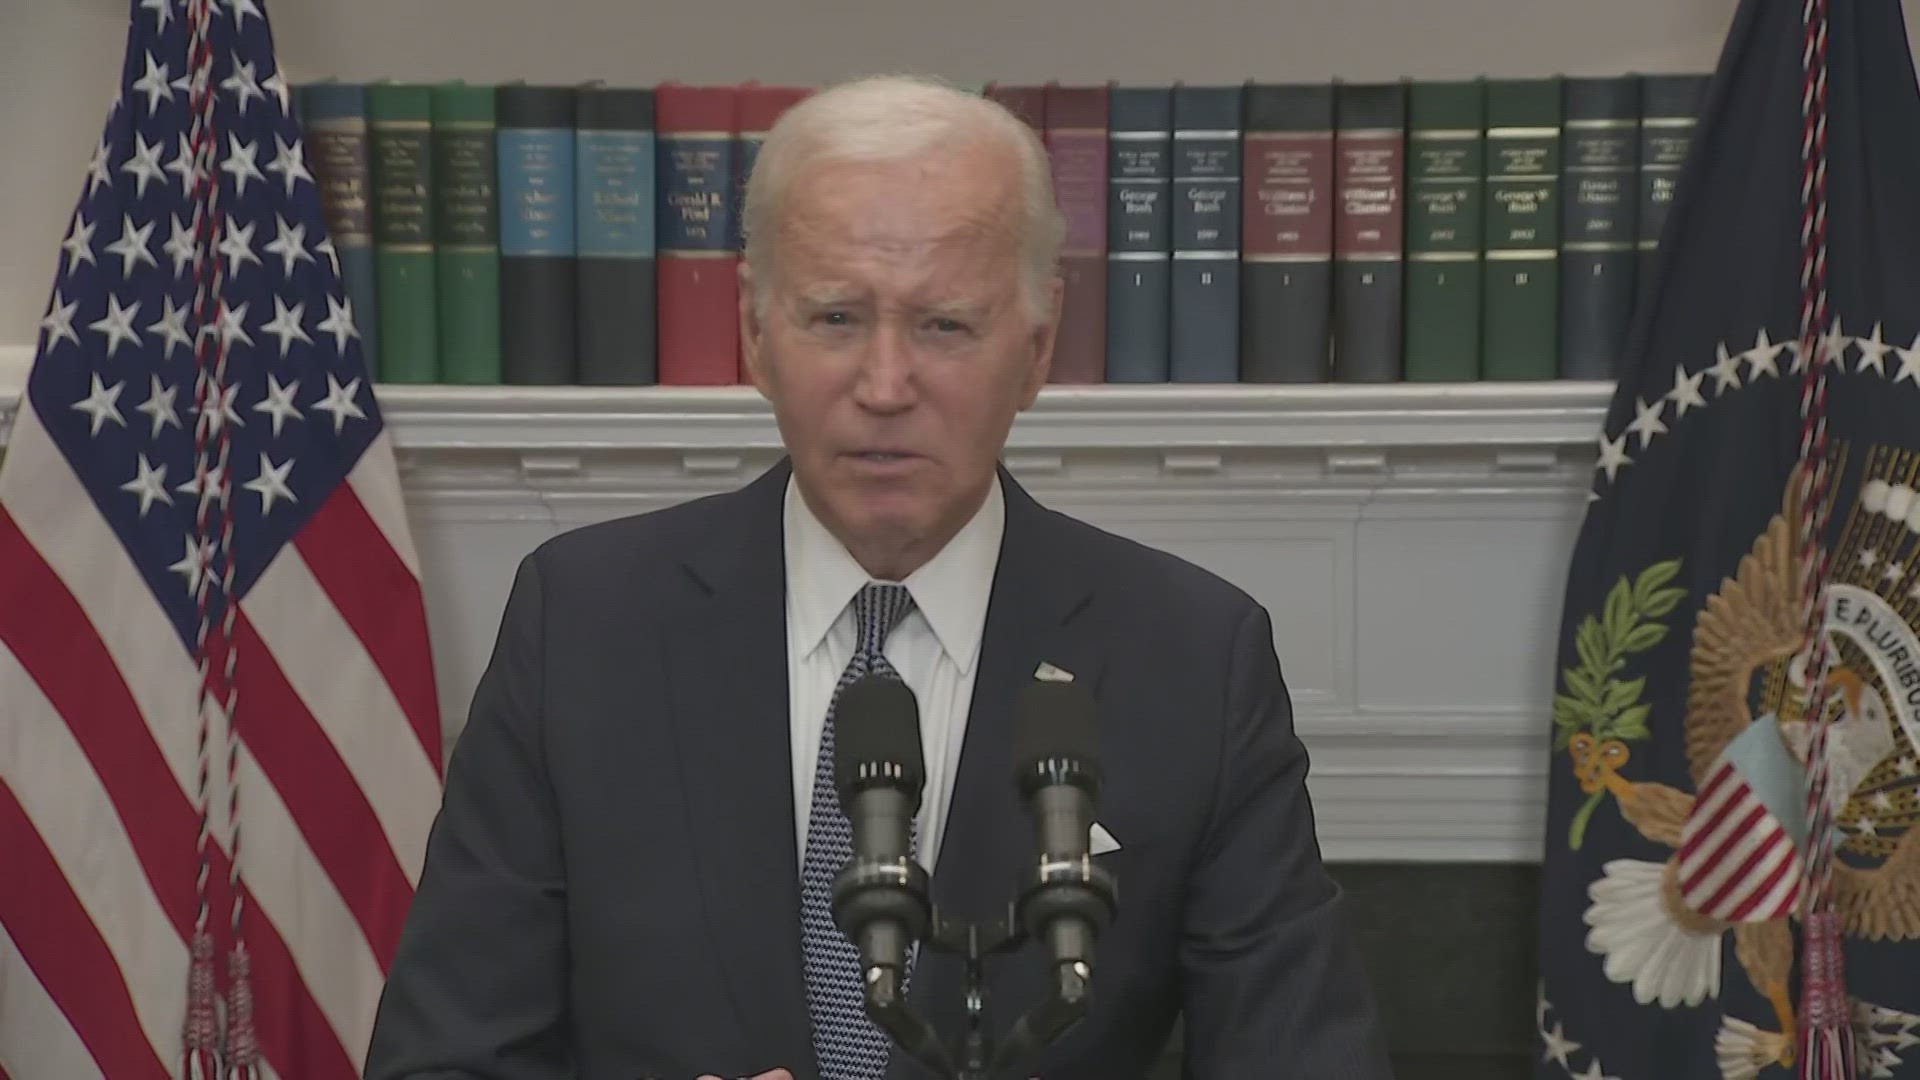 Biden says his administration is moving forward on a new student debt relief plan after Supreme Court killed the original.